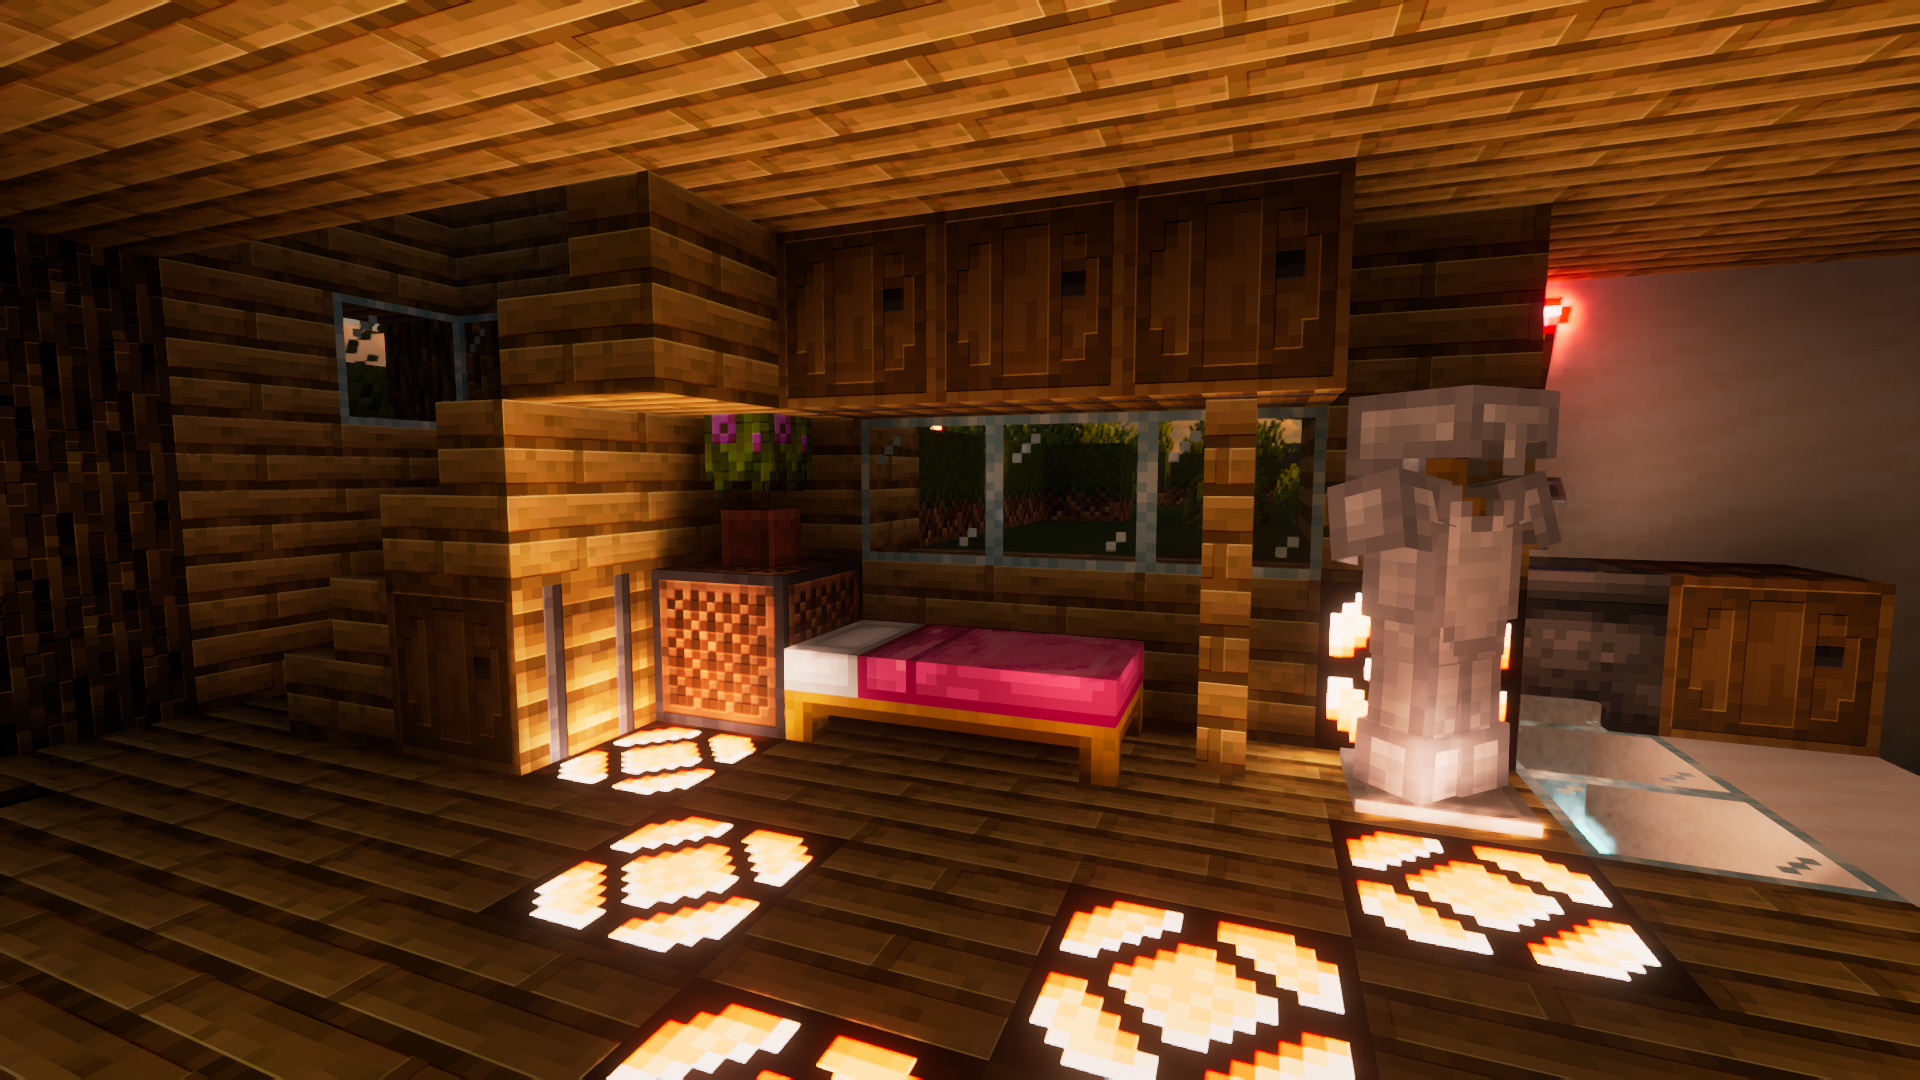 General 1920x1080 Minecraft ray tracing path tracing CGI video games cube bed interior wood